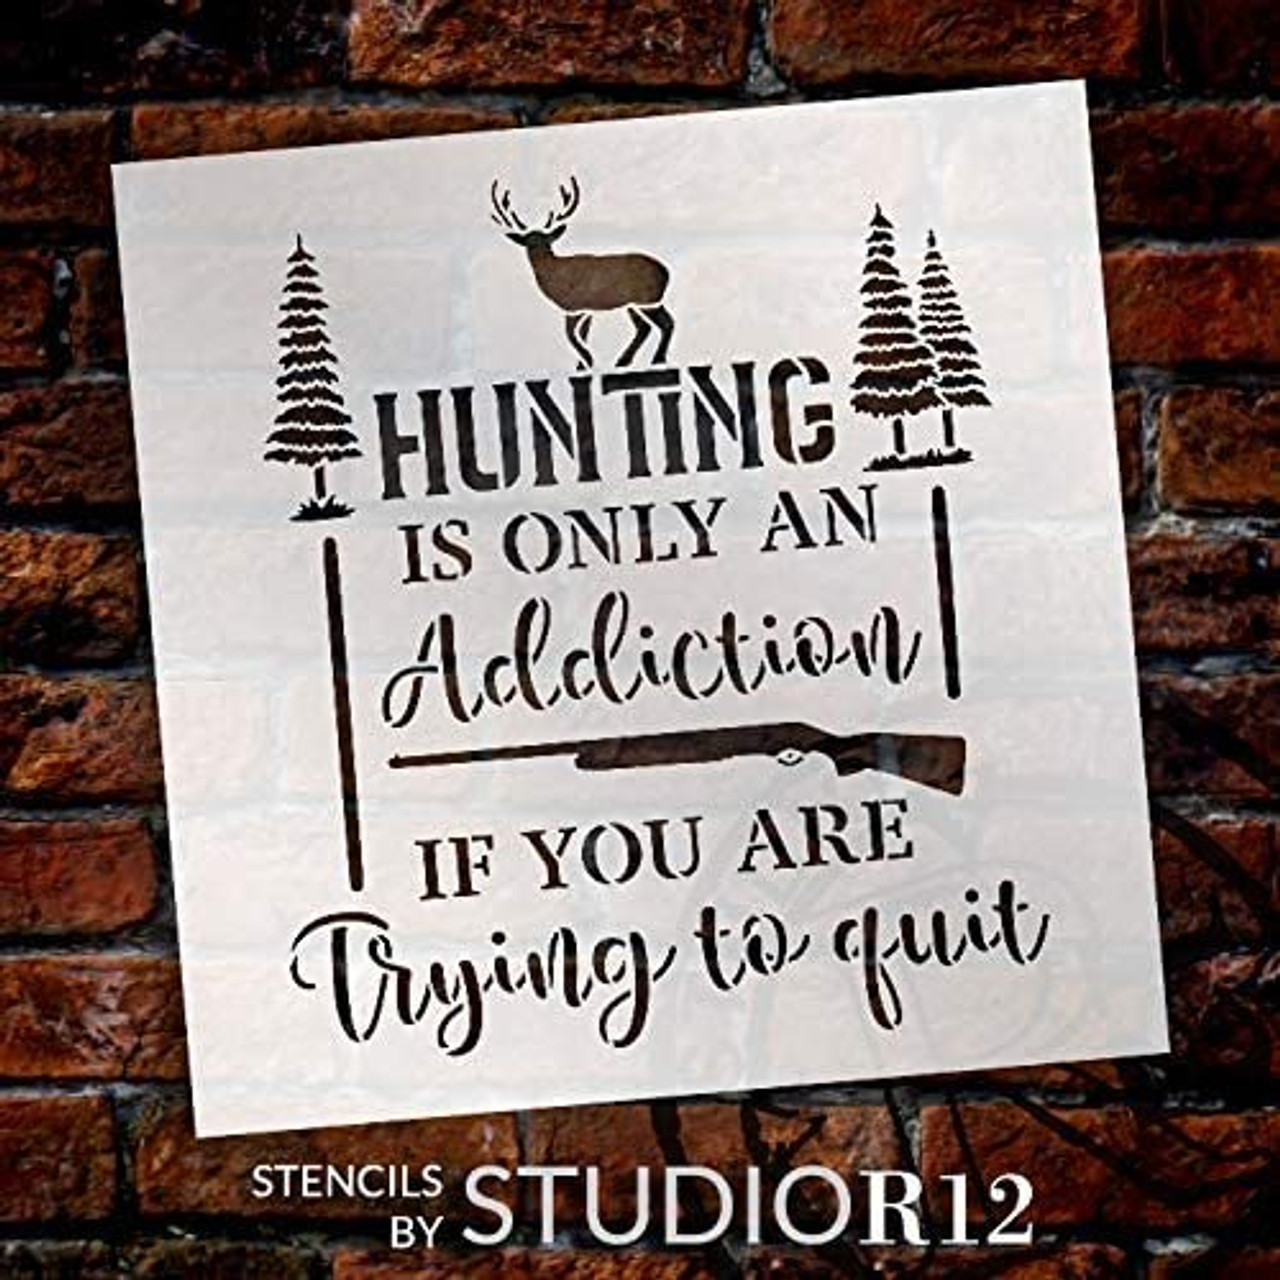 Hunting - Addiction if Trying to Quit Stencil by StudioR12 | DIY Nature Home Decor | Craft & Paint Wood Sign Reusable Mylar Template | Select Size